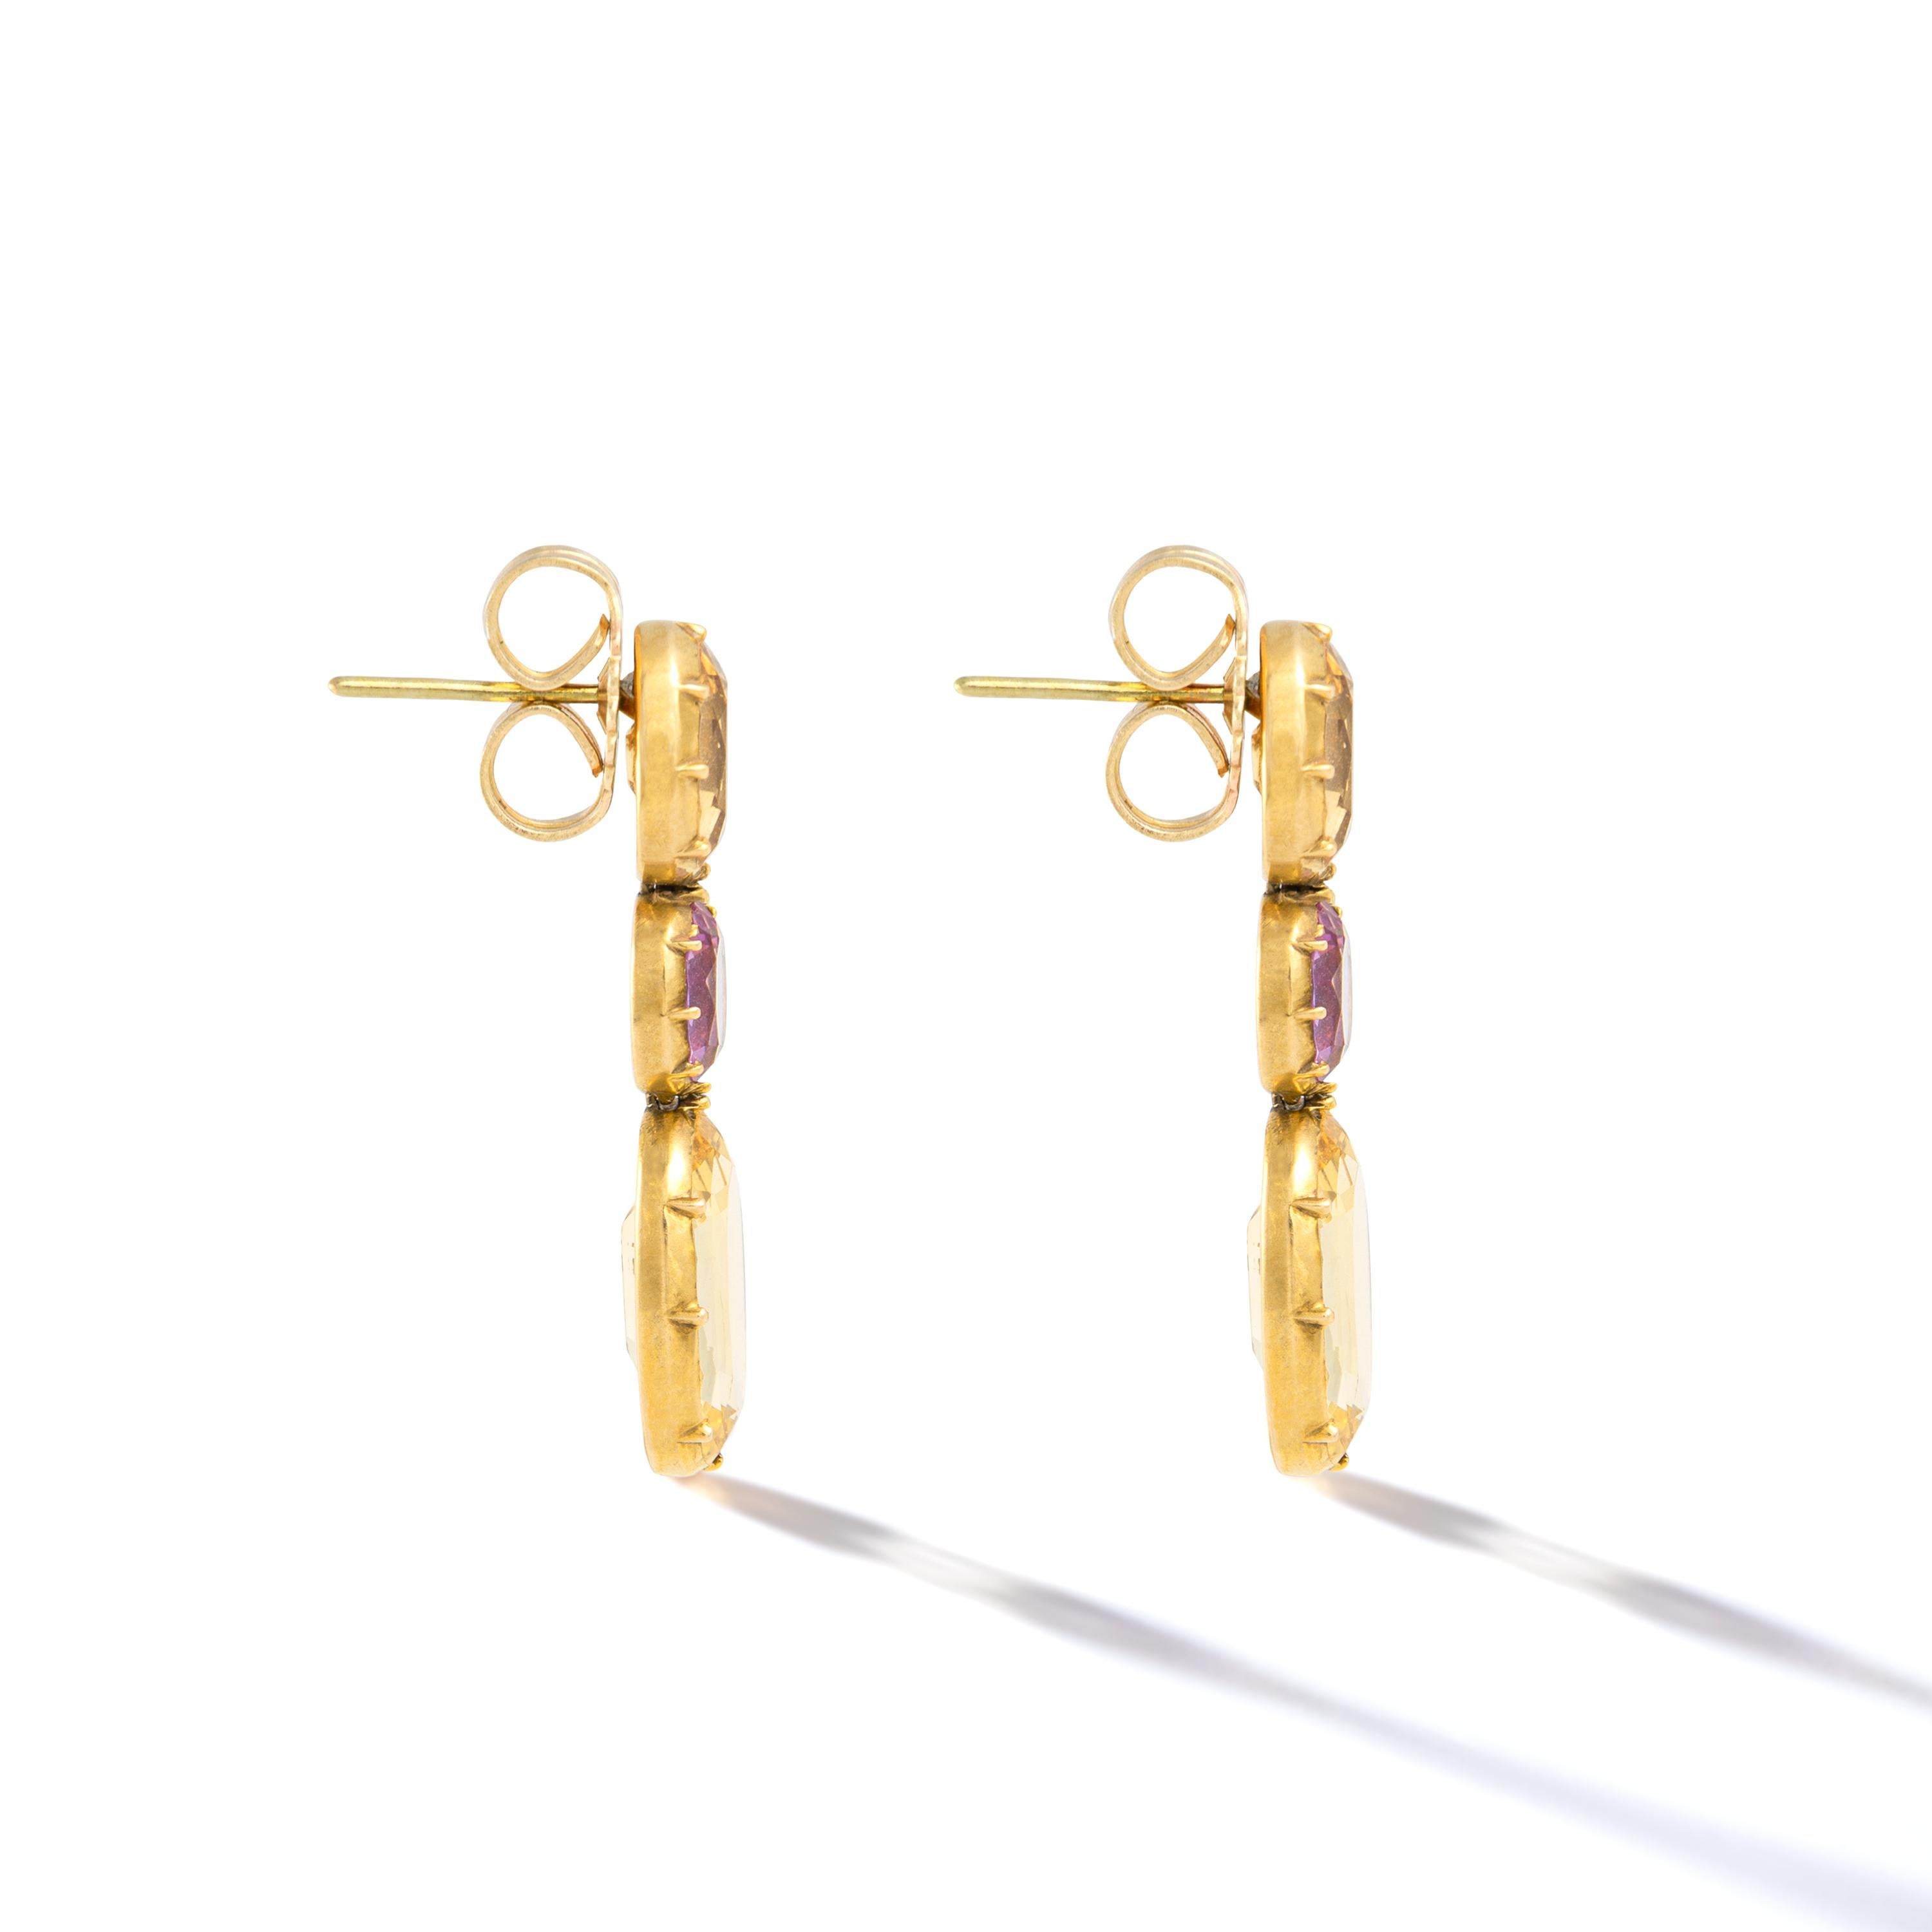 Antique revival Citrine and Amethyst on Yellow Gold Earrings.

Total height: 1.38 inch (3.50 centimeters).
Total width: 0.39 inch (1.00 centimeter).

Former collection of a French Lady.
